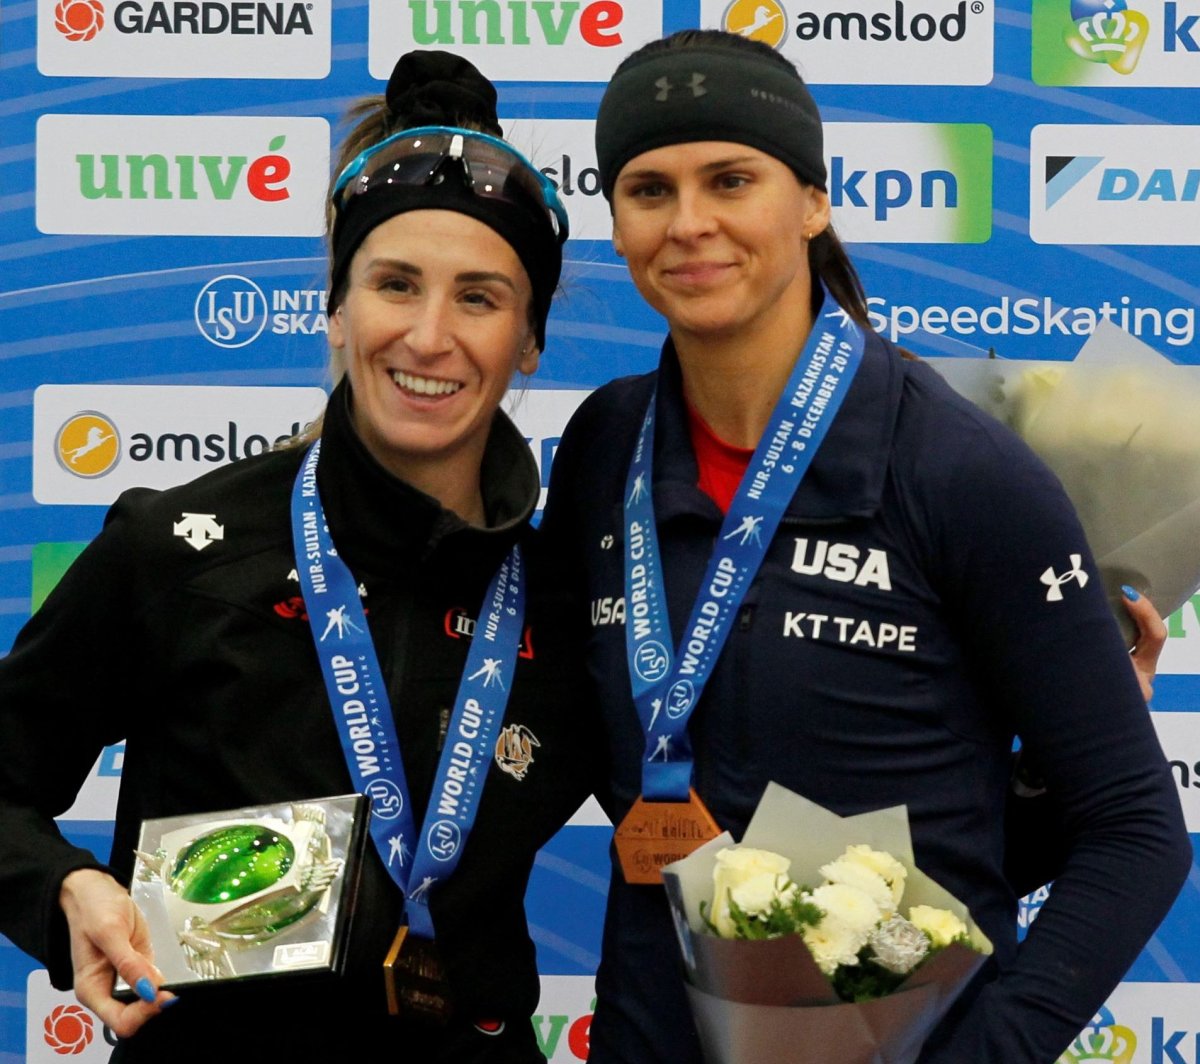 Gold medalist Ivanie Blondin of Canada (left) and Silver medalist Brittany Bowe of the USA (right) pose on the podium after the Women's 1500m race at the ISU Speed Skating World Cup in Nur-Sultan, Kazakhstan, Dec. 8, 2019.